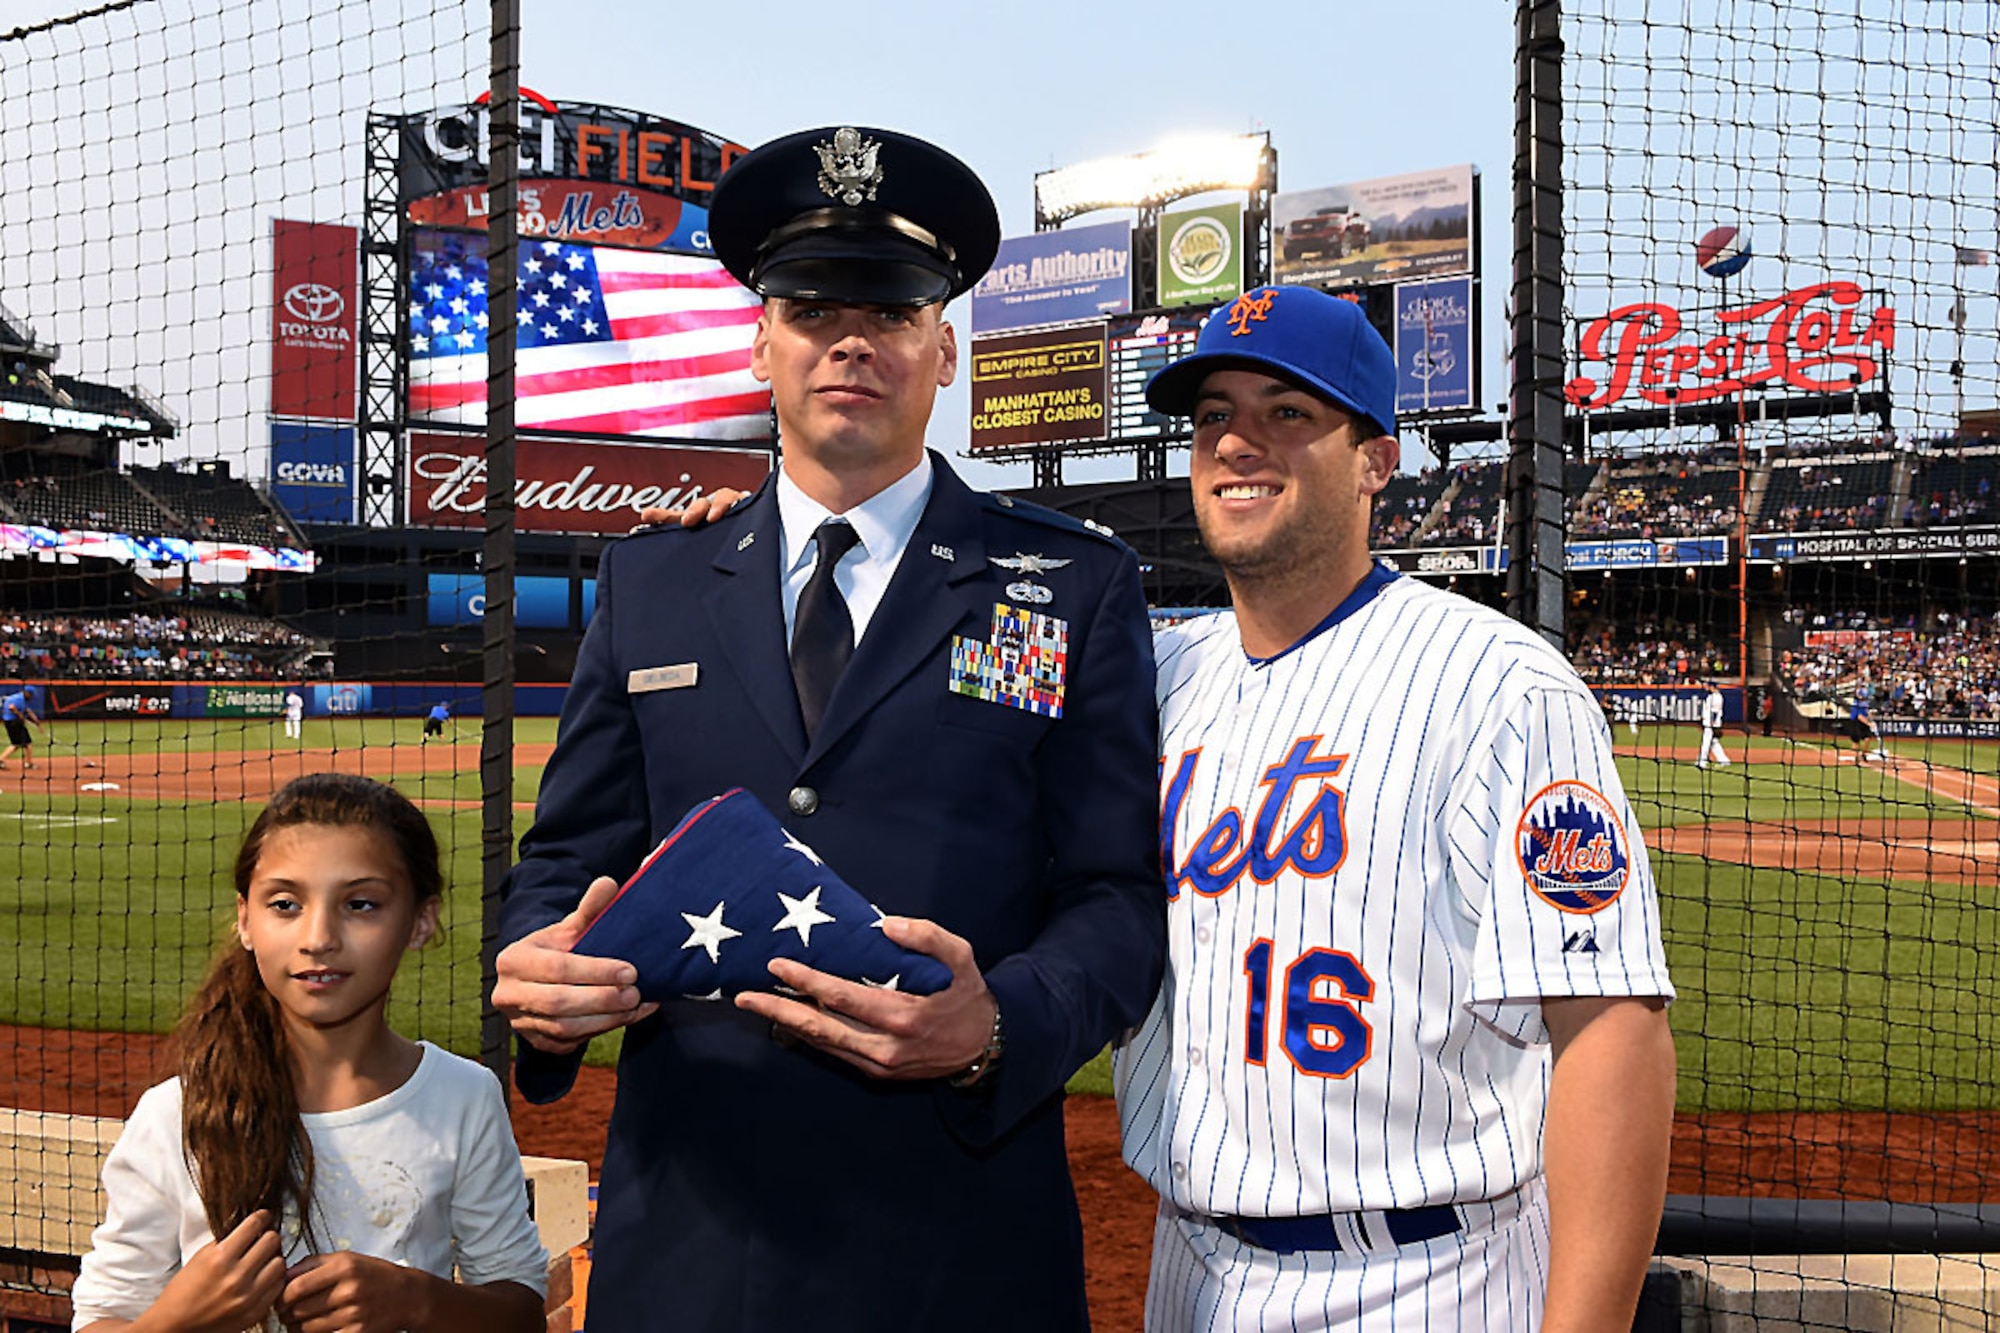 Mets second baseman, Danny Muno, posses with Capt. Michael Gielbeda, communications and information officer with the 111th Operations Support Squadron and his daughter, June 9 at Citi Field, Queens, N.Y. Gielbeda was recognized as the Veteran of the Game by the Mets and the Wounded Warrior Project during the game against the San Francisco Giants. (Image provided by Capt. Michael Gielbeda)